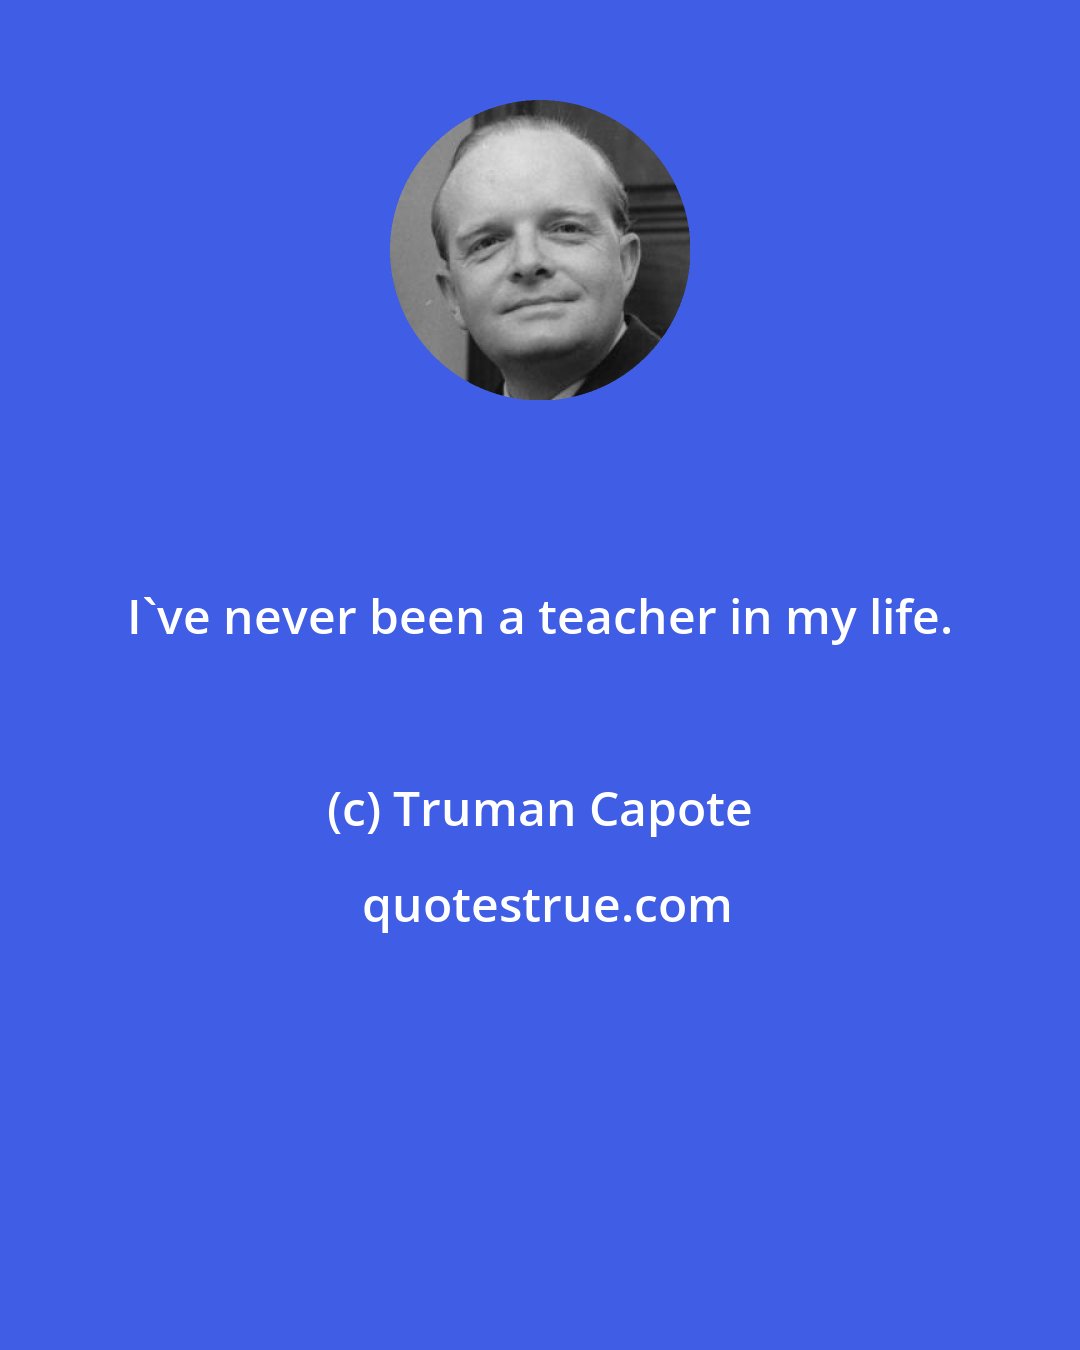 Truman Capote: I've never been a teacher in my life.